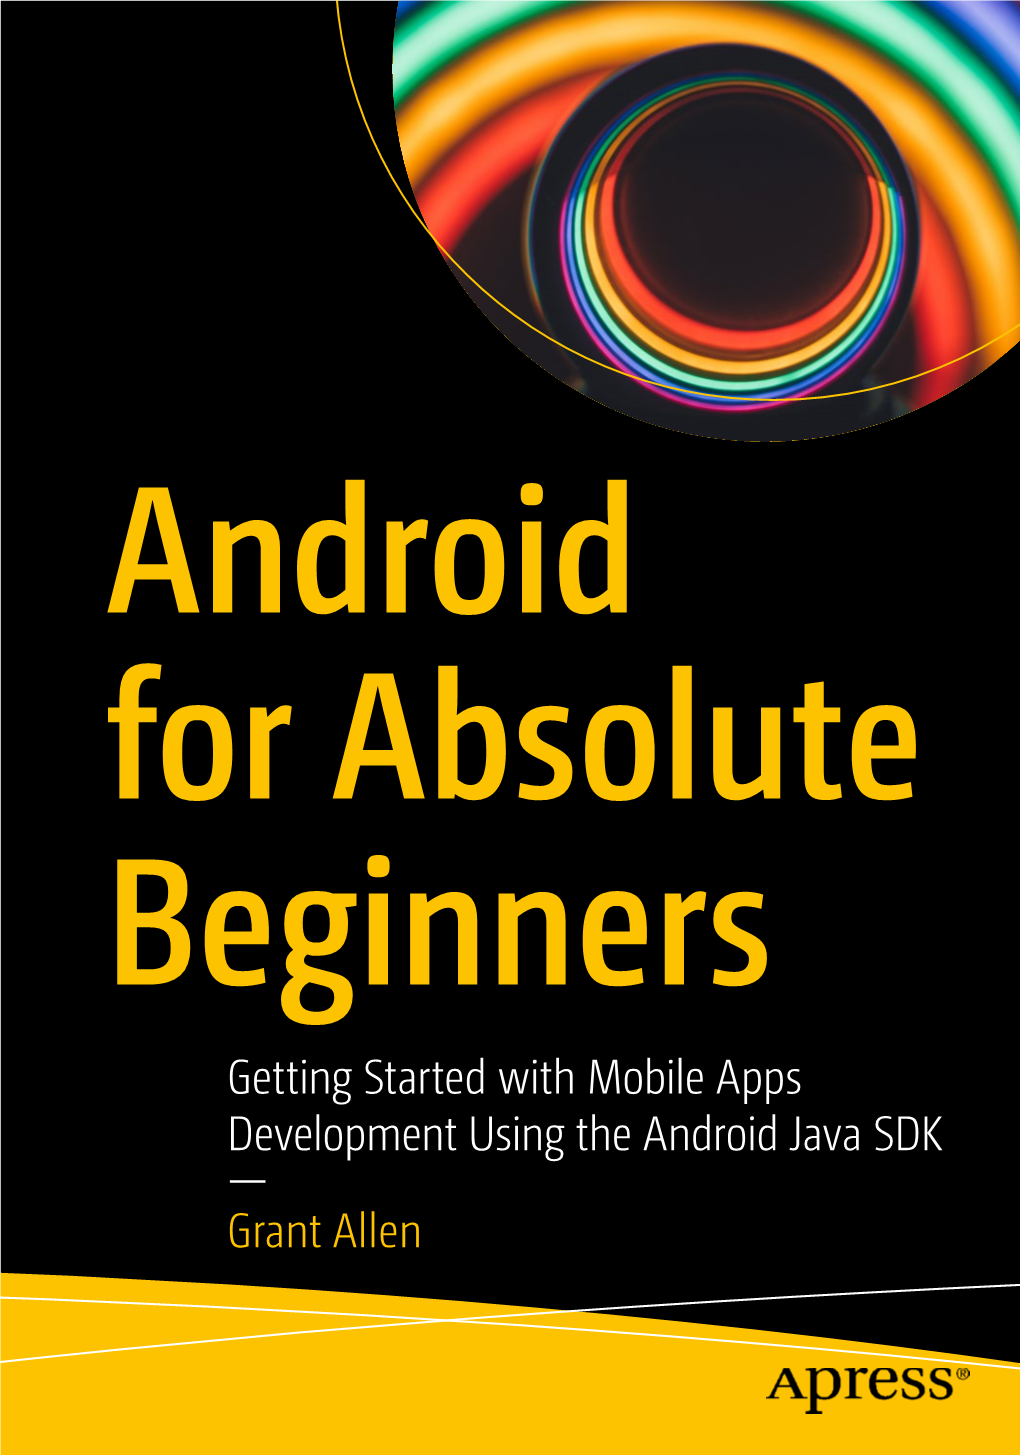 Getting Started with Mobile Apps Development Using the Android Java SDK — Grant Allen Android for Absolute Beginners